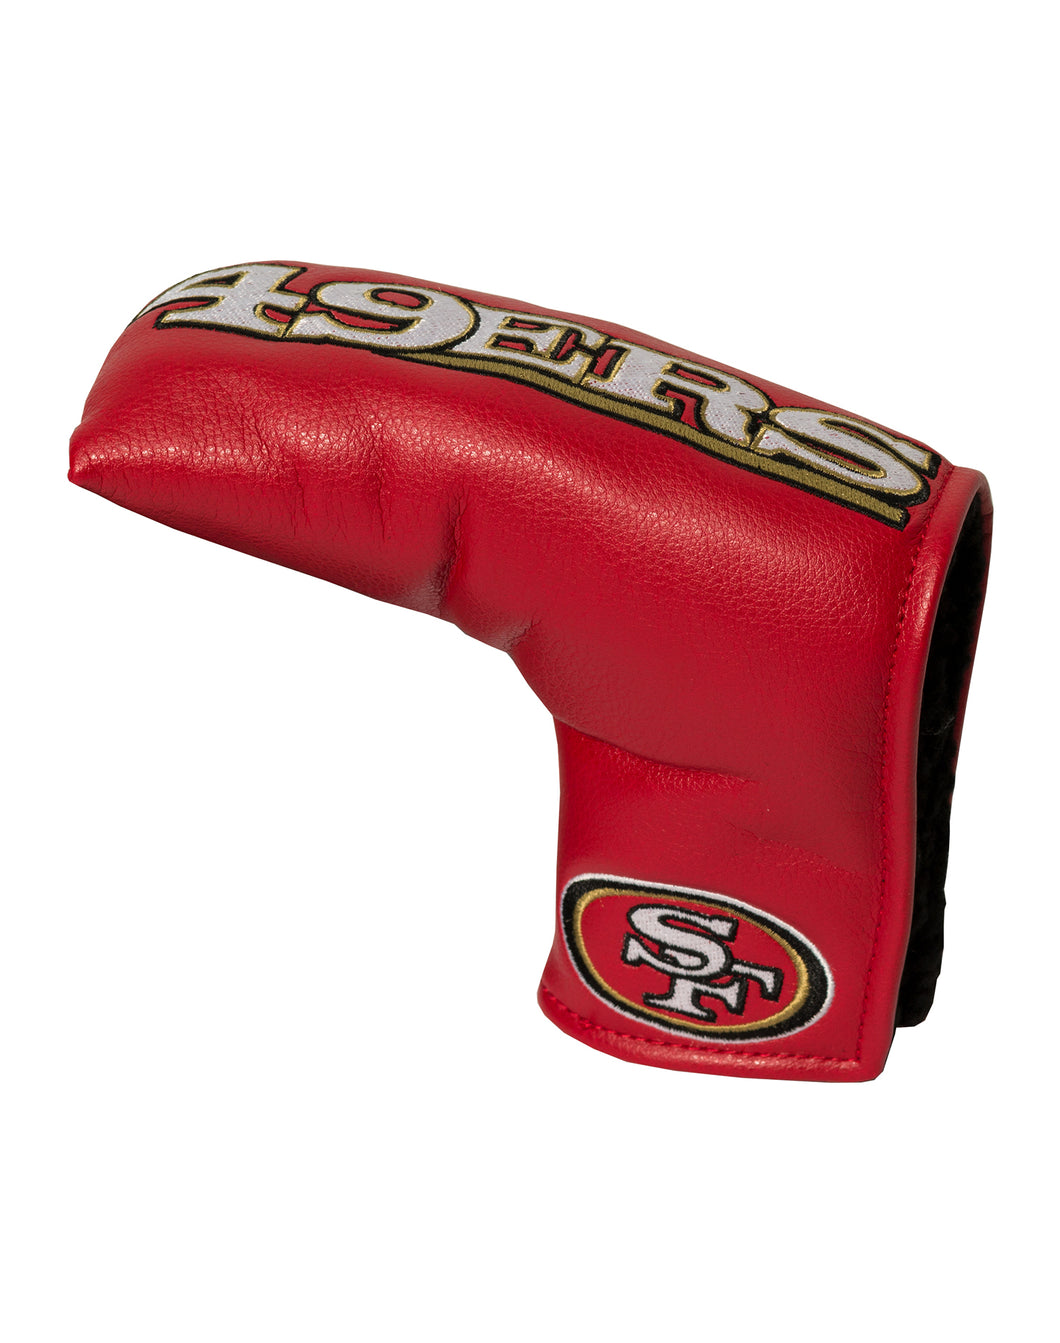 NFL Official Vintage Golf Blade Style Putter Headcover. San Francisco 49 ers.